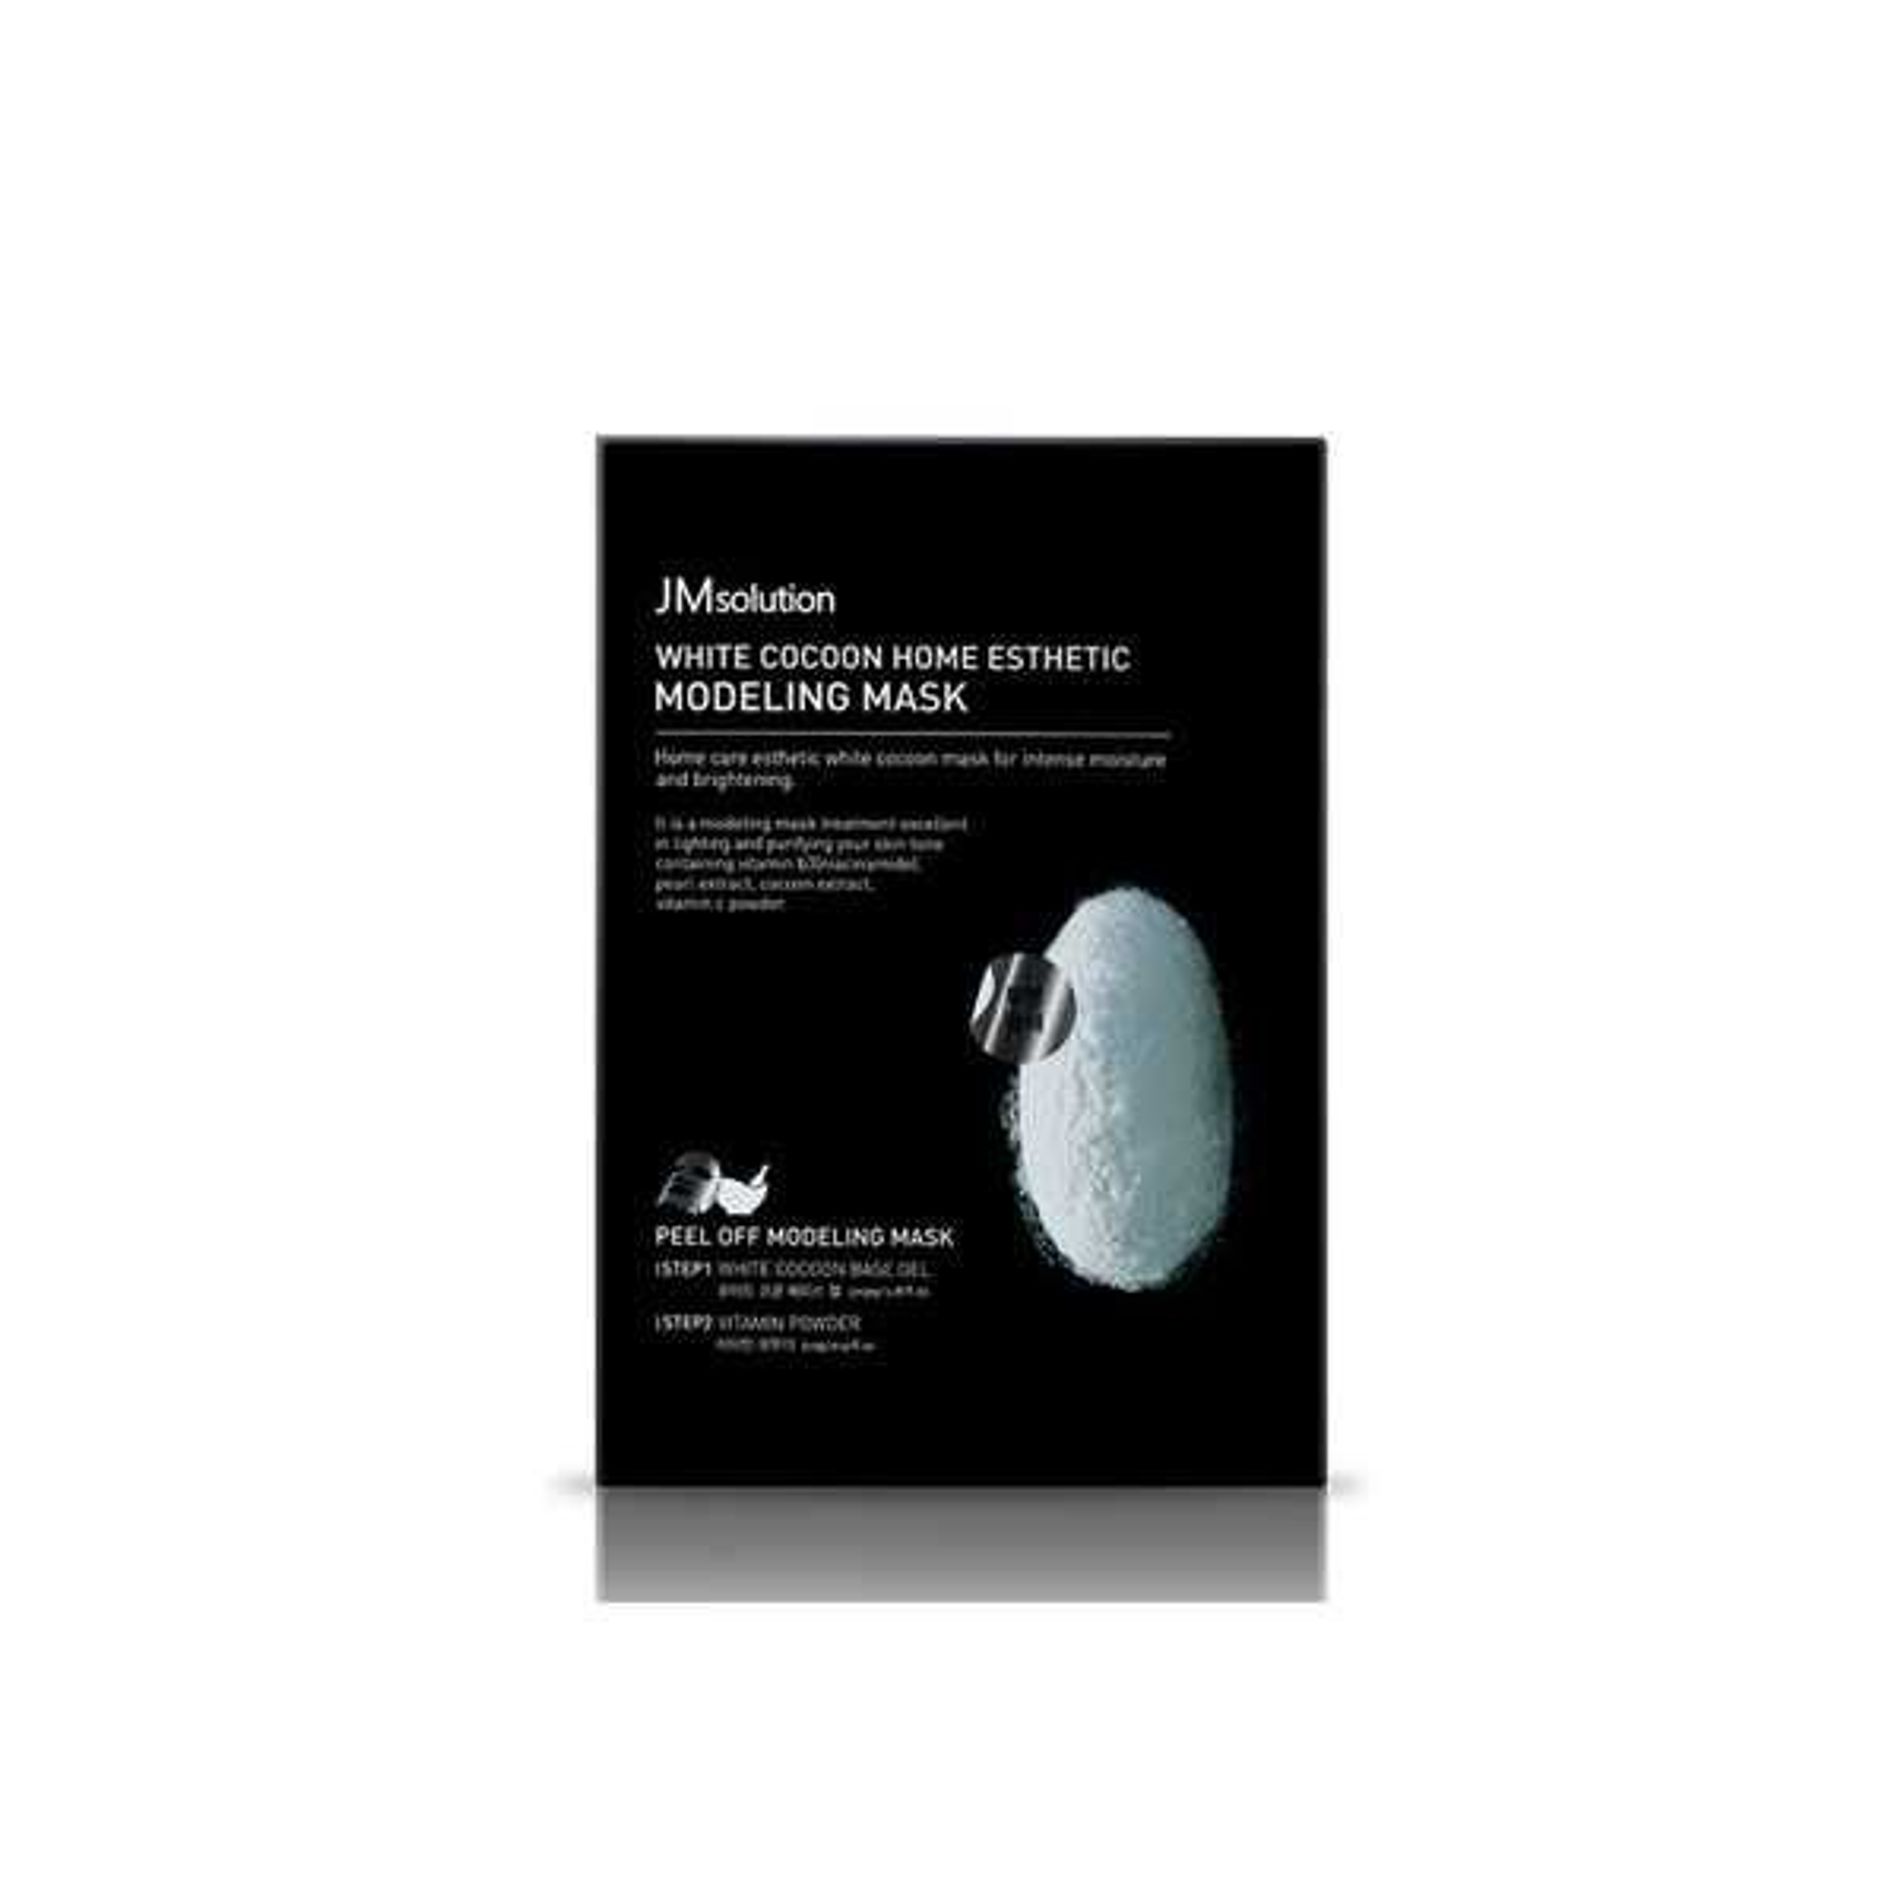 mat-na-giay-jmsolution-white-cocoon-home-esthetic-modeling-mask-2